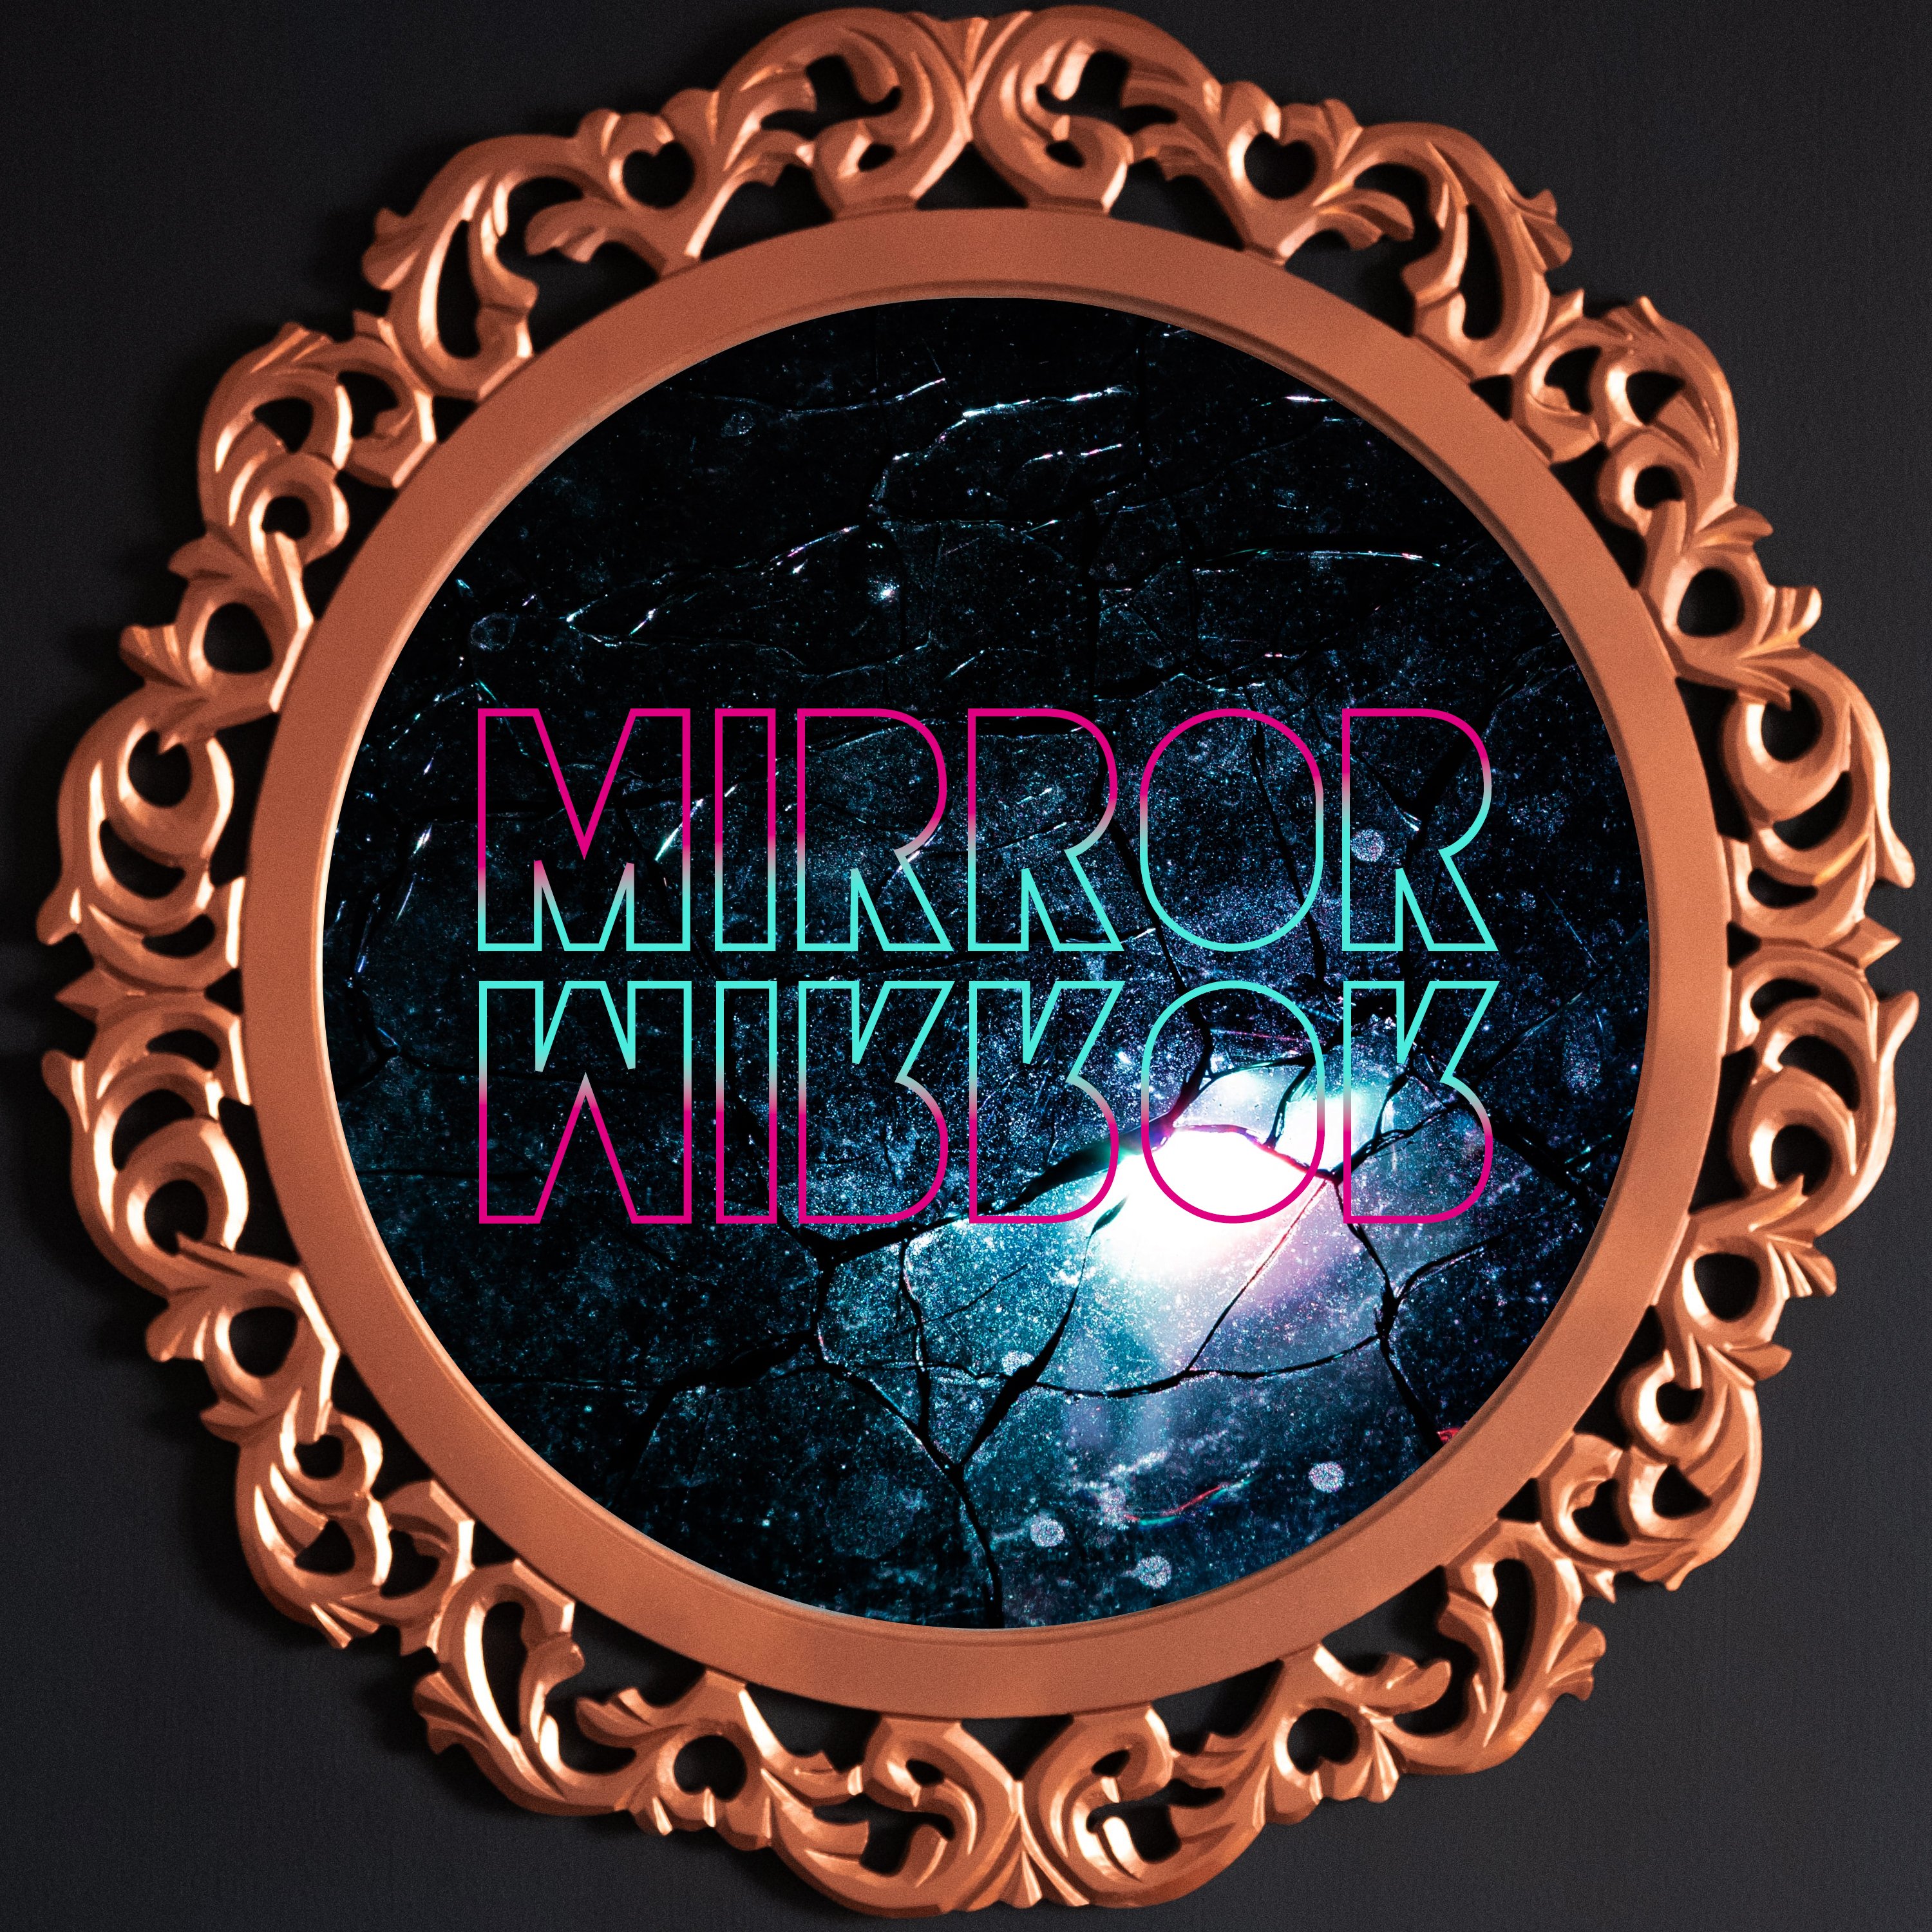 Mirror Mirror marching band show cover